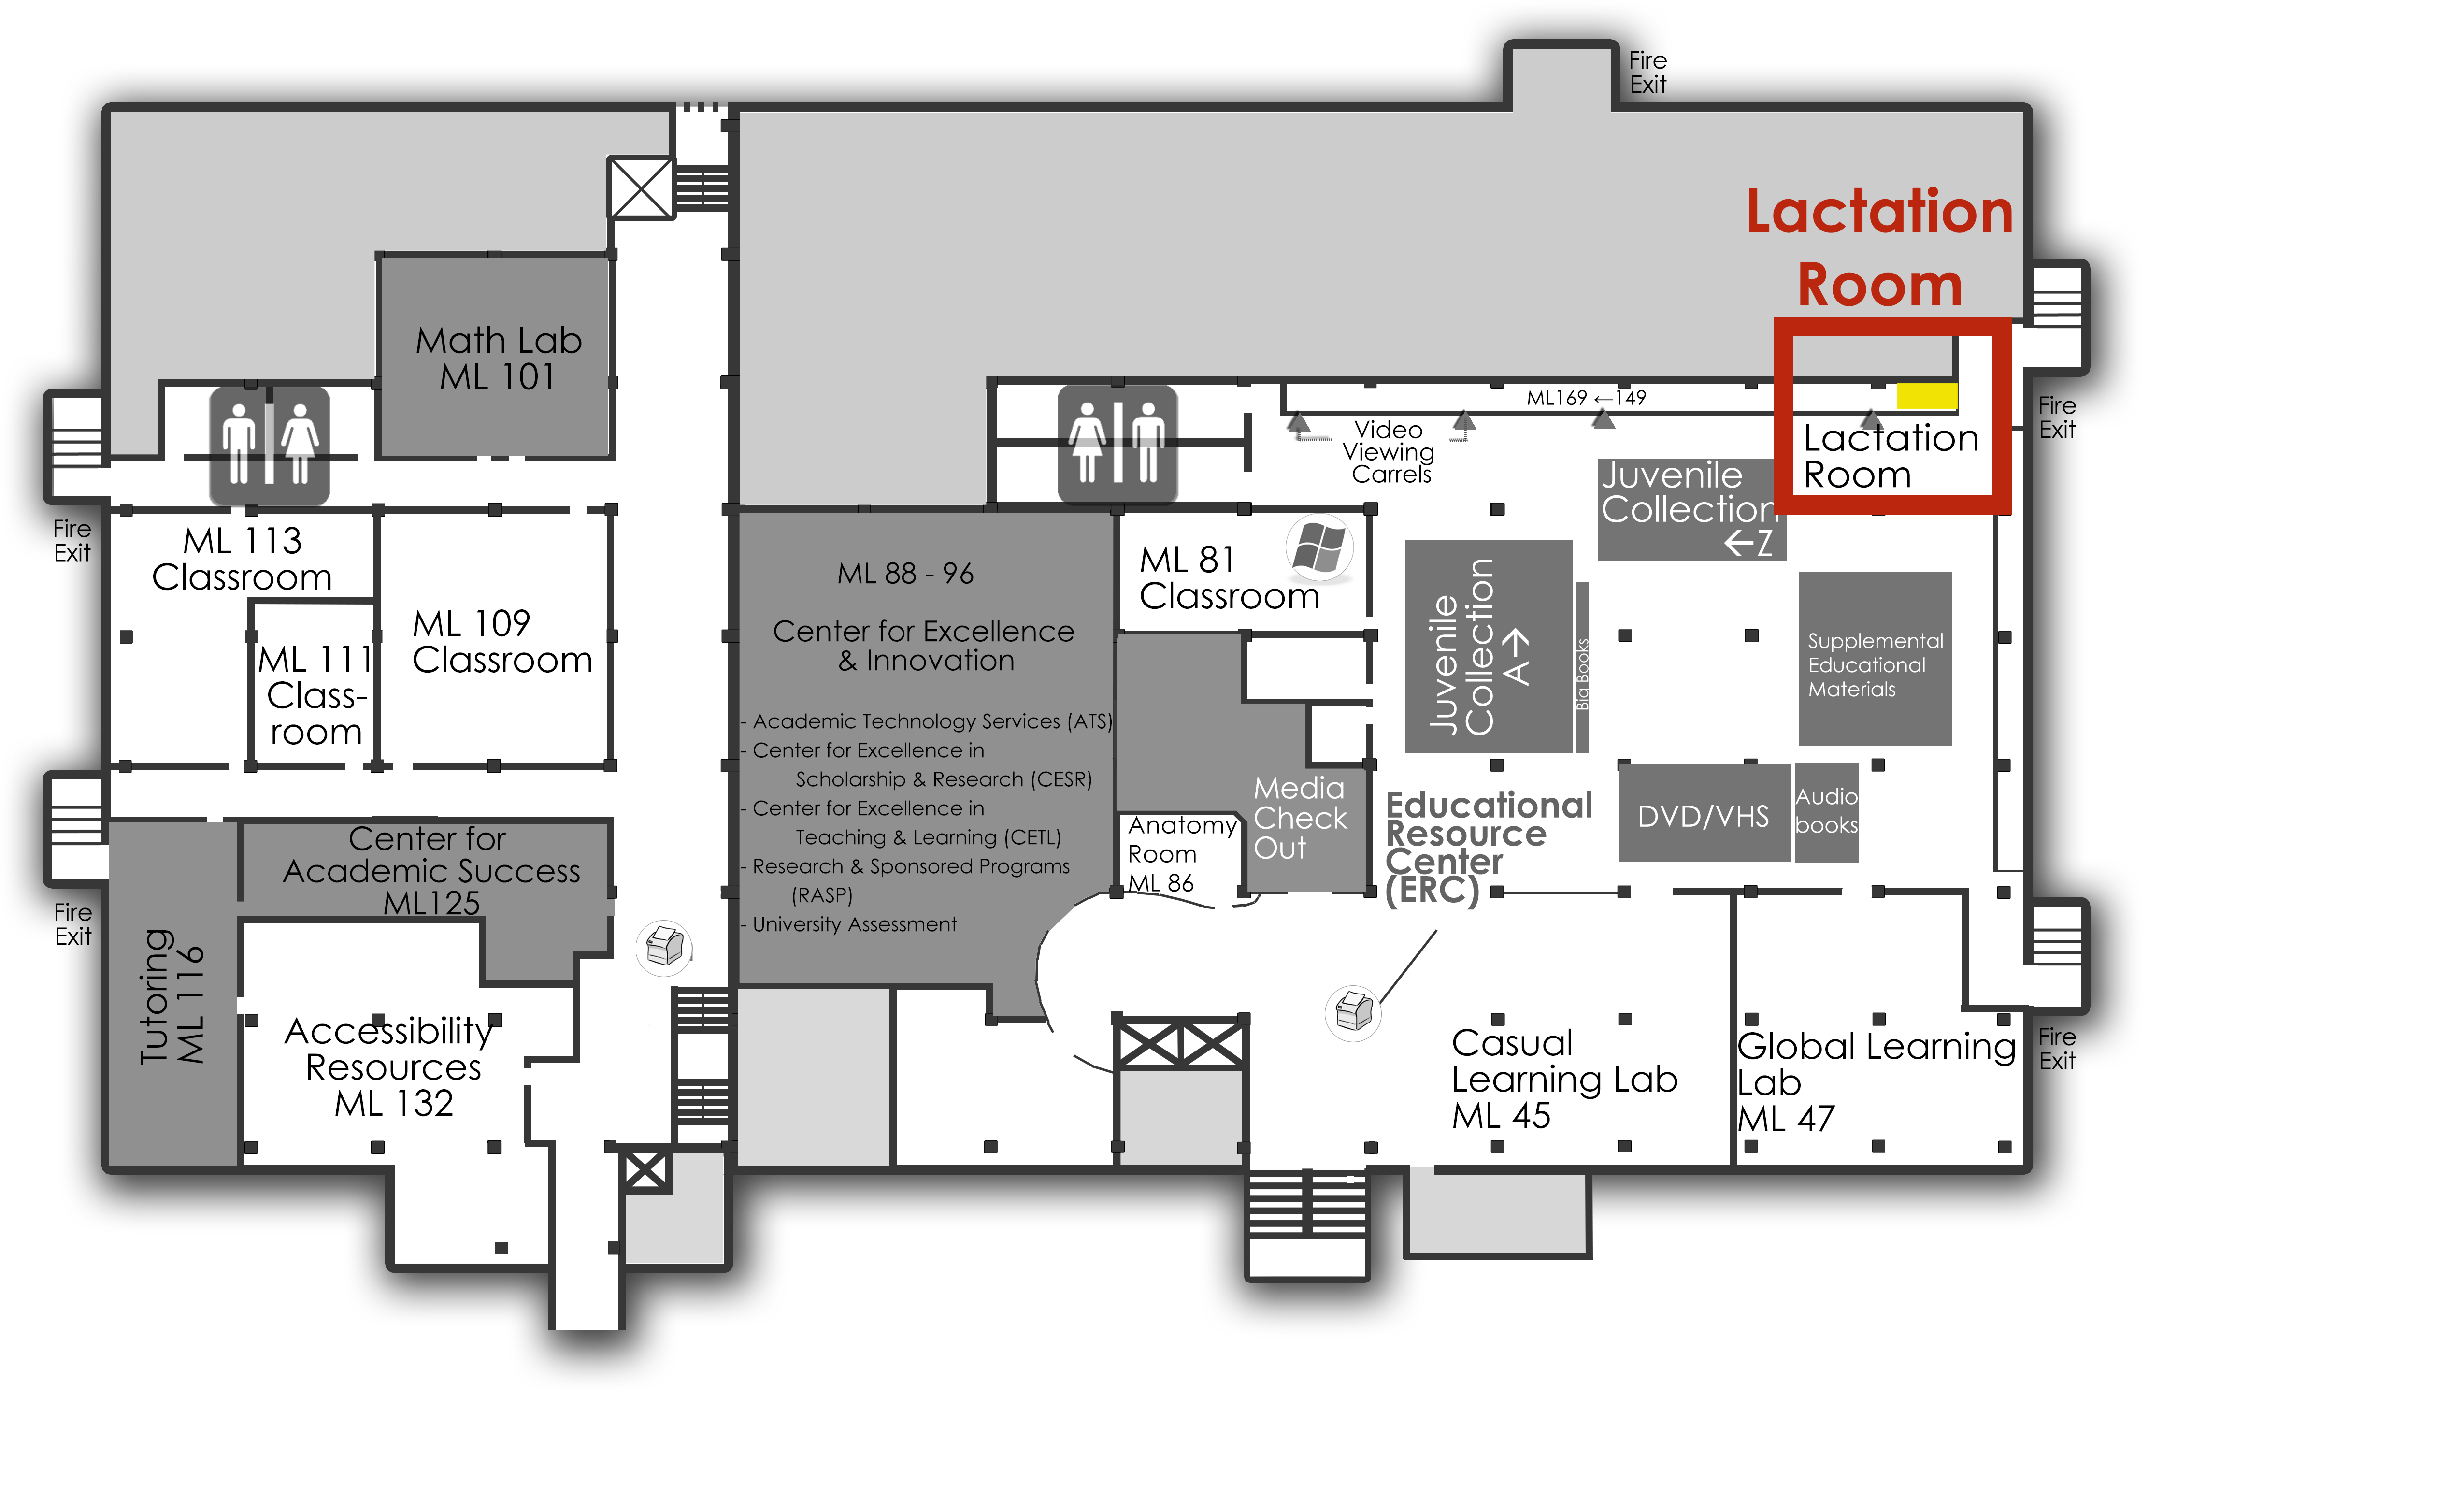 the lactation room is located in the back of lower level east near the individual study rooms